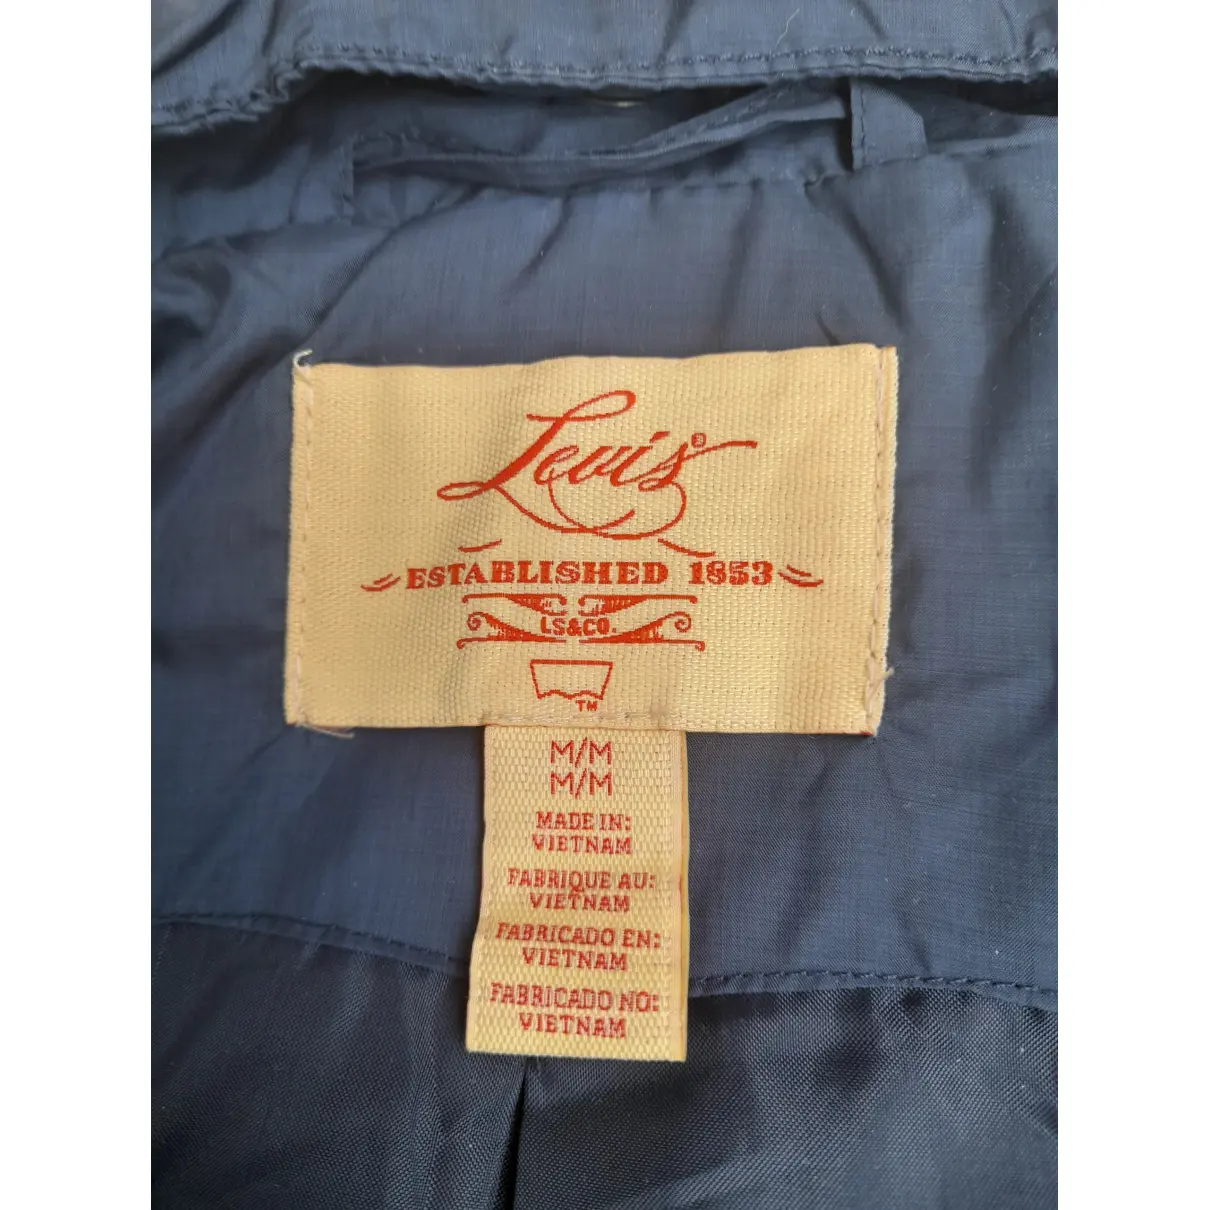 Buy Levi's Vintage Clothing Puffer online